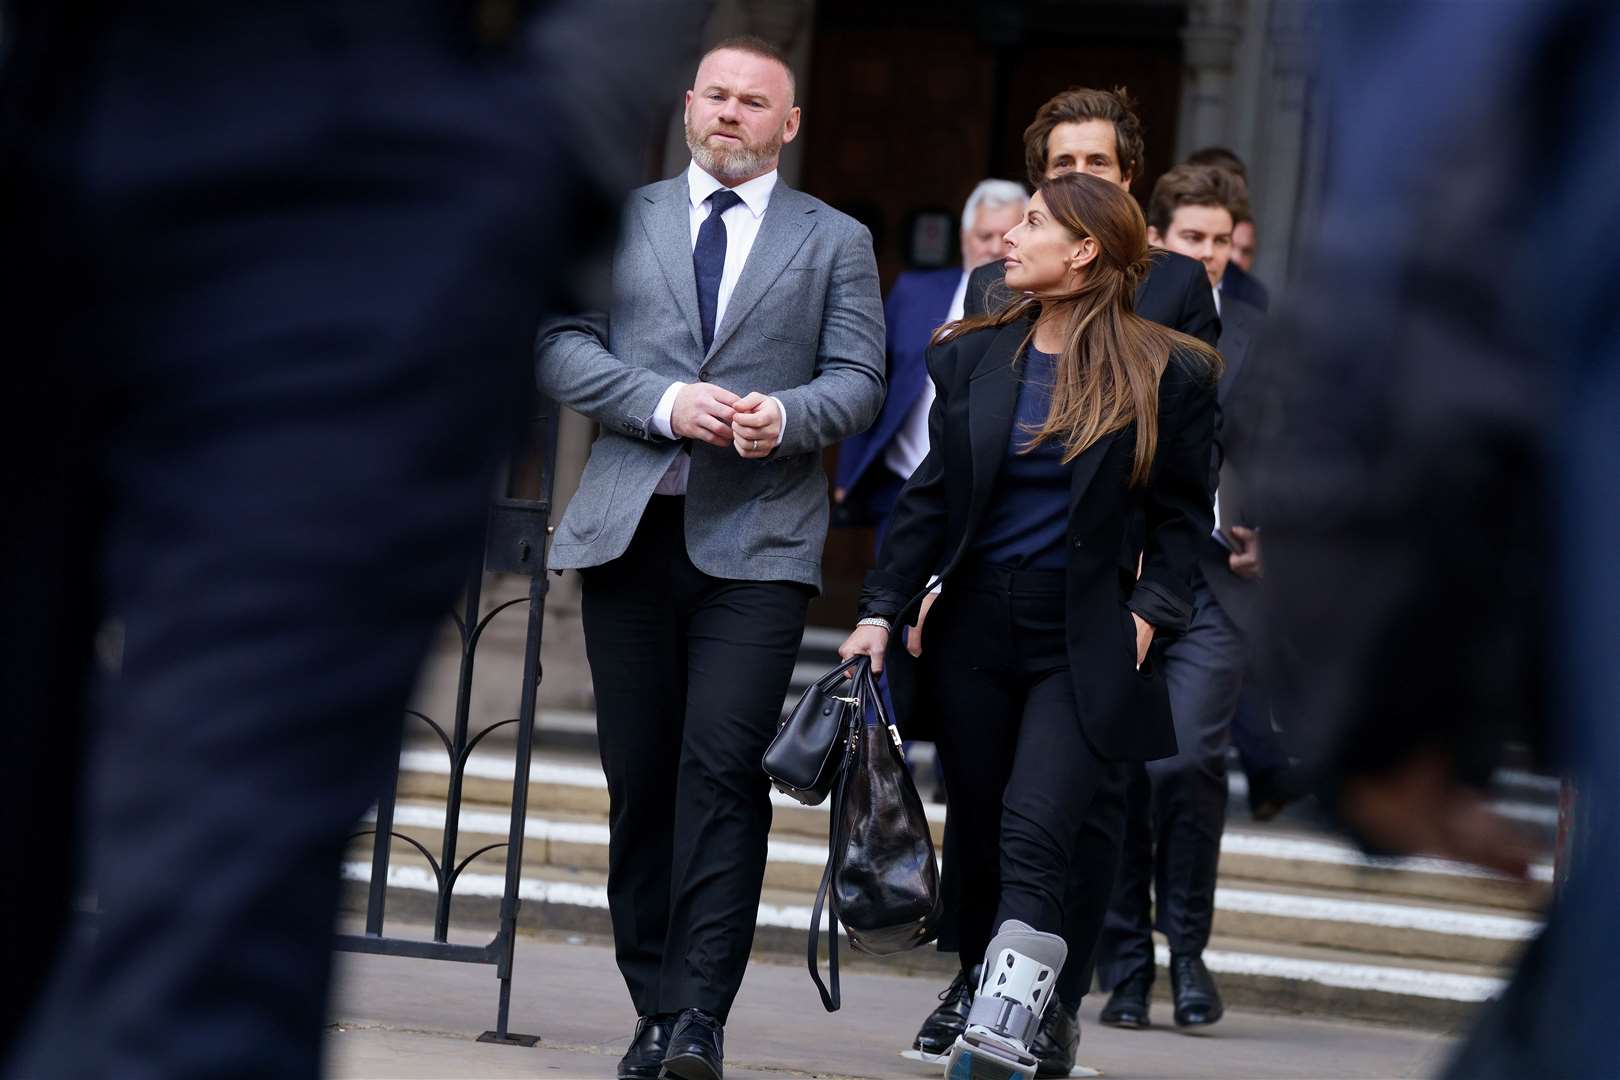 Wayne and Coleen Rooney leave the Royal Courts of Justice on Tuesday (Victoria Jones/PA)